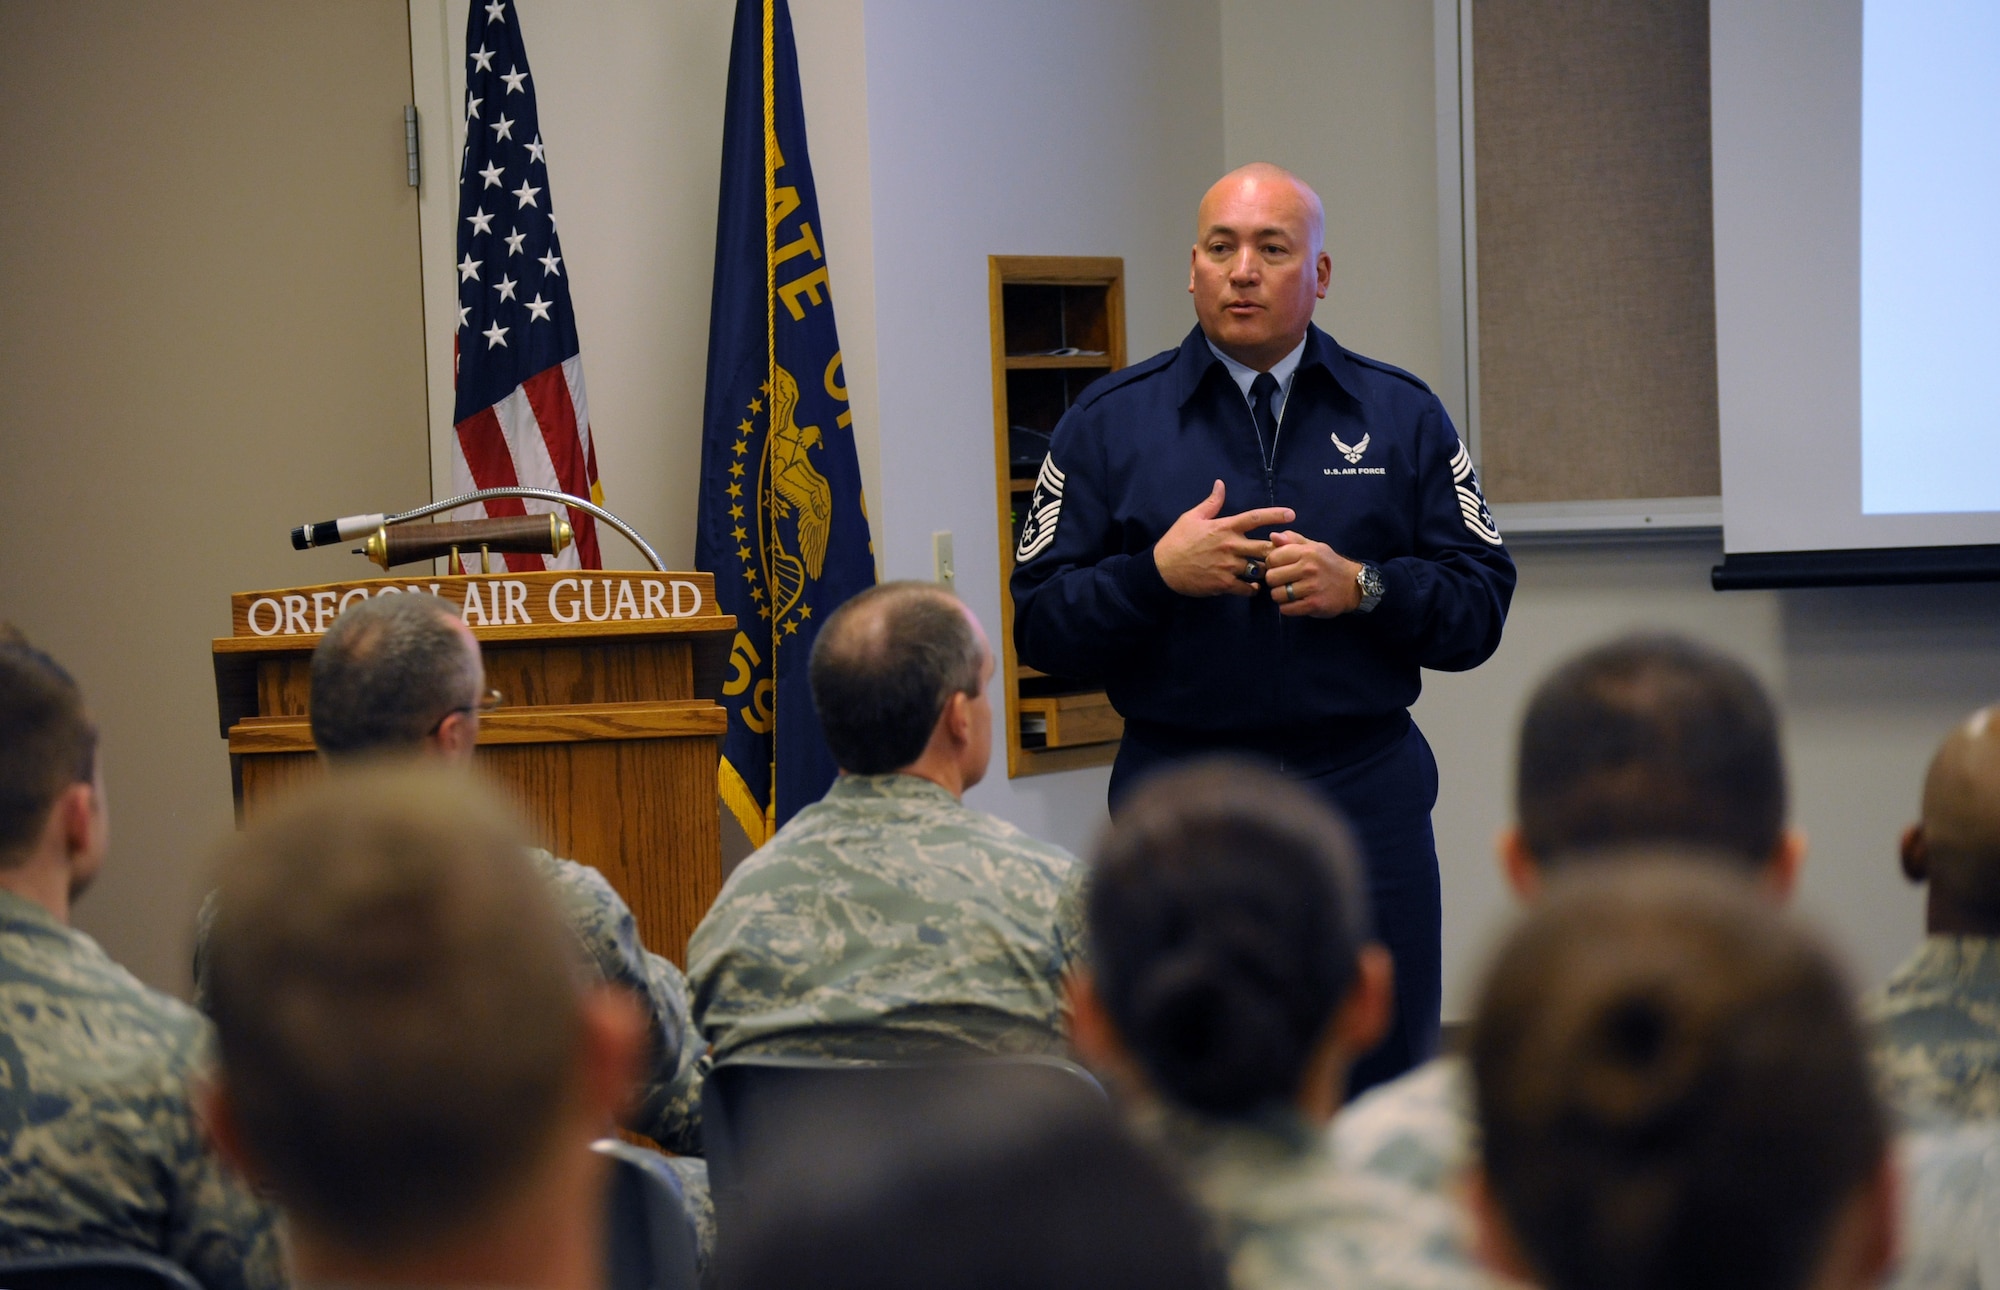 Air Force Chief Master Sgt. Mitchell O. Brush, Senior enlisted advisor for the National Guard Bureau, address those in attendance at a town hall event at the Portland Air National Guard Base, Ore., Aug. 15, 2015. (U.S. Air National Guard photo by Tech. Sgt. John Hughel, 142nd Fighter Wing Public Affairs/Released)